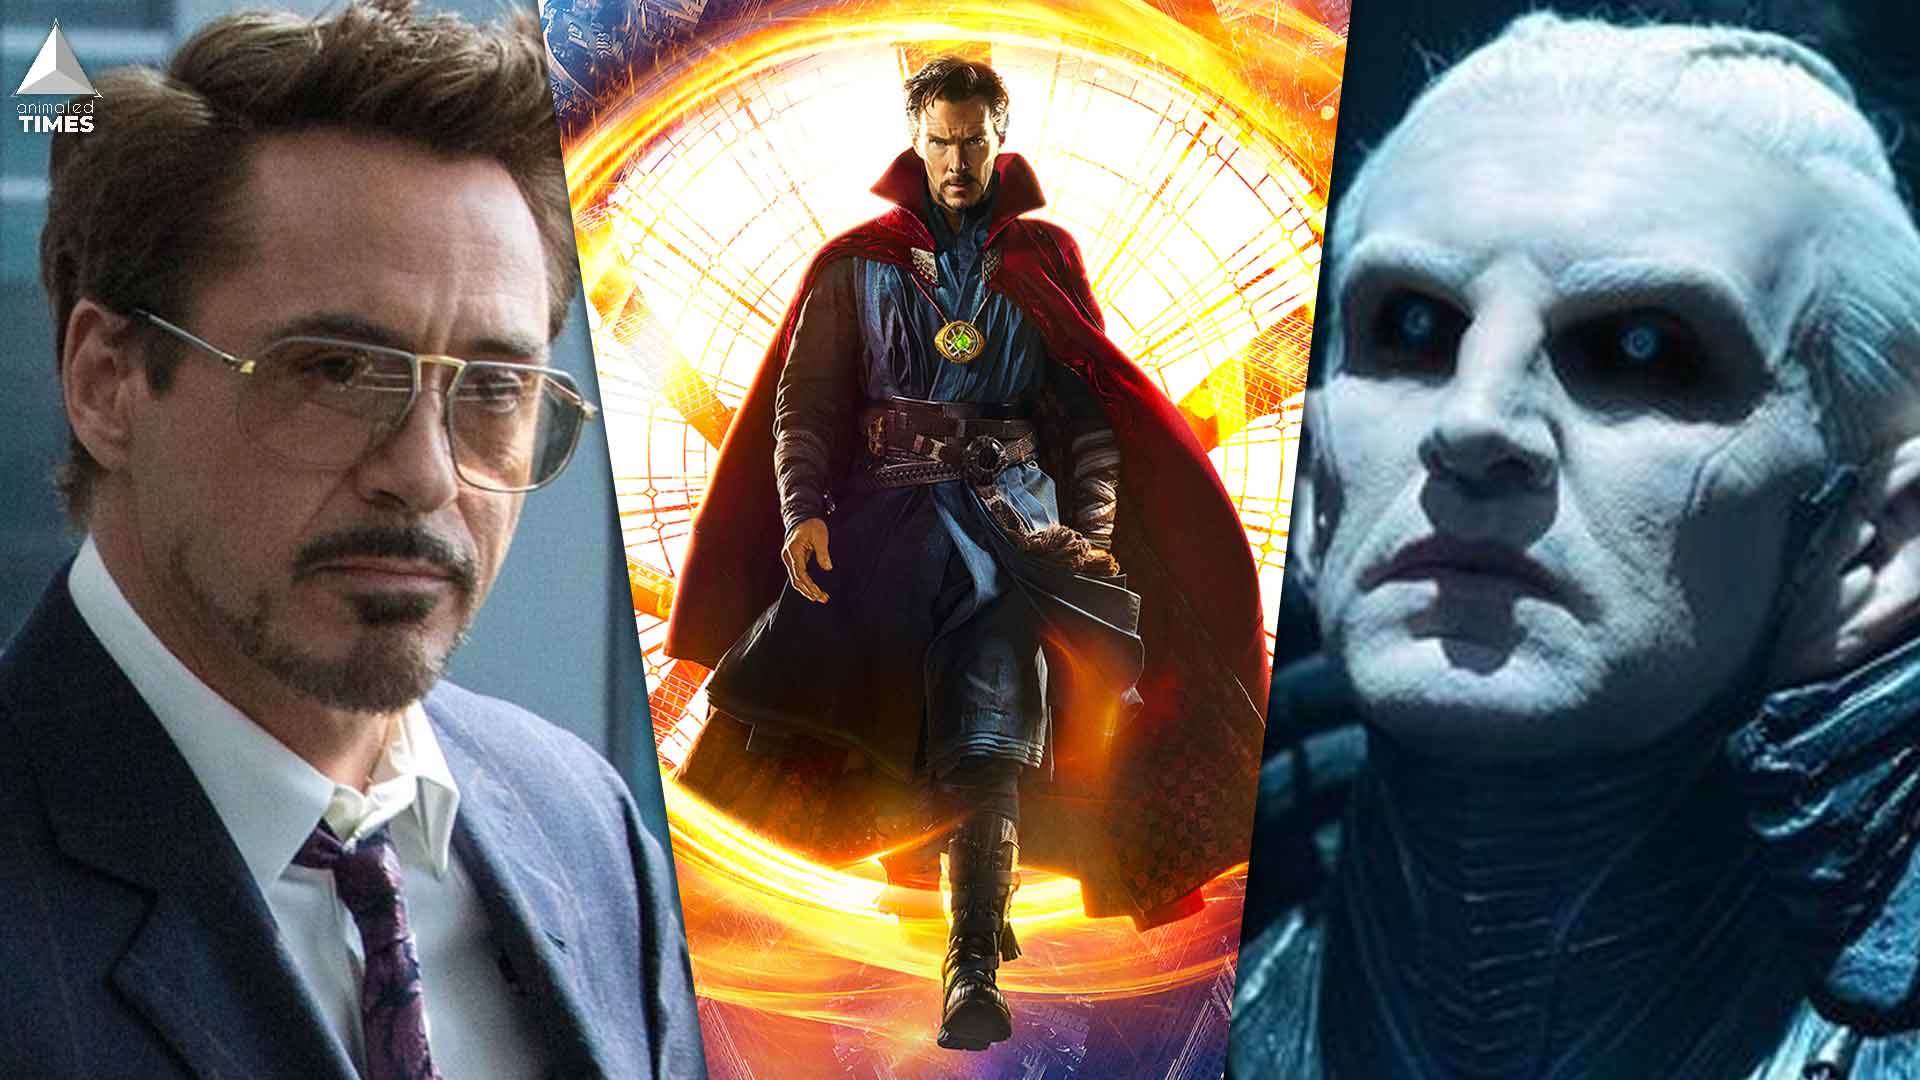 5 Of The MCU Movies That Stick To The Marvel Formula & 5 Of Them That Deviate From It